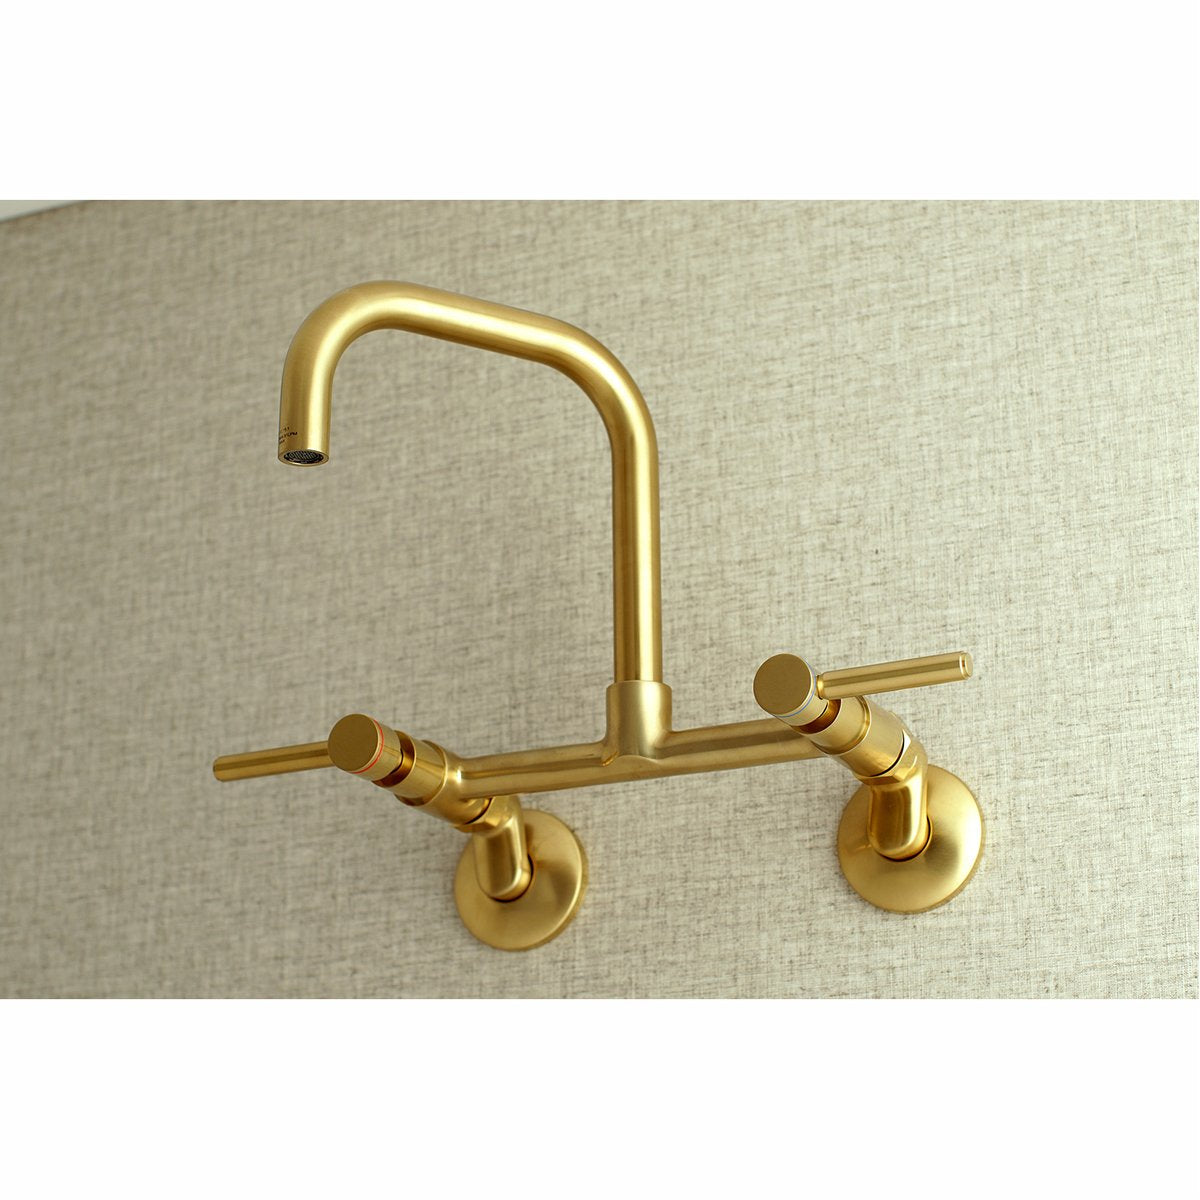 Kingston Brass Concord 8-Inch Adjustable Center Wall Mount 2-Hole Kitchen Faucet